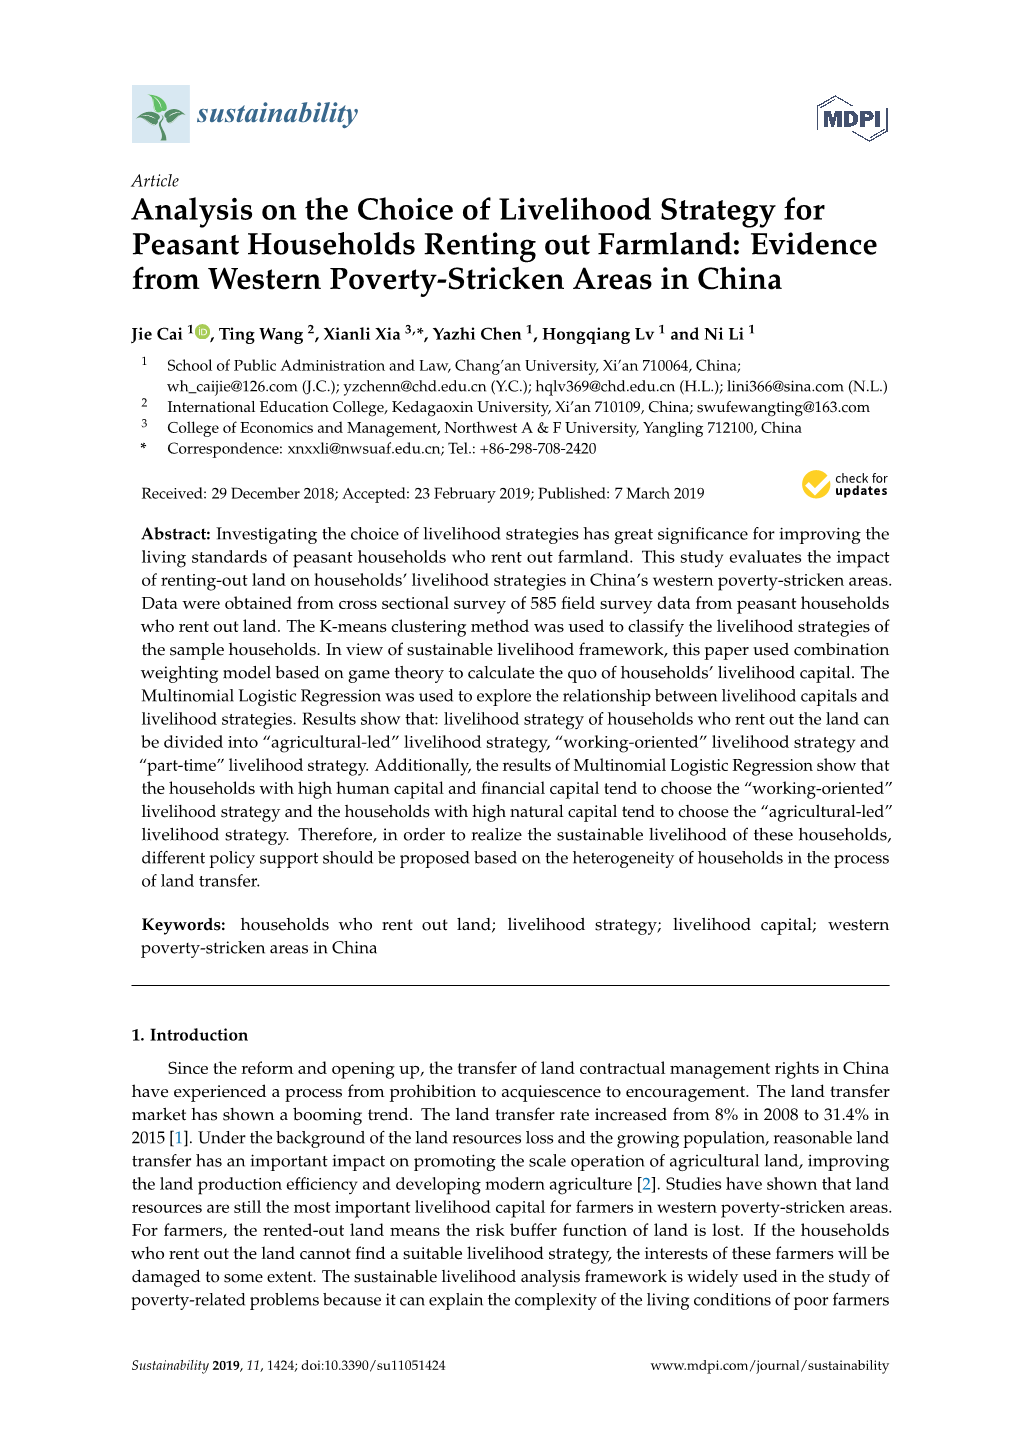 Analysis on the Choice of Livelihood Strategy for Peasant Households Renting out Farmland: Evidence from Western Poverty-Stricken Areas in China